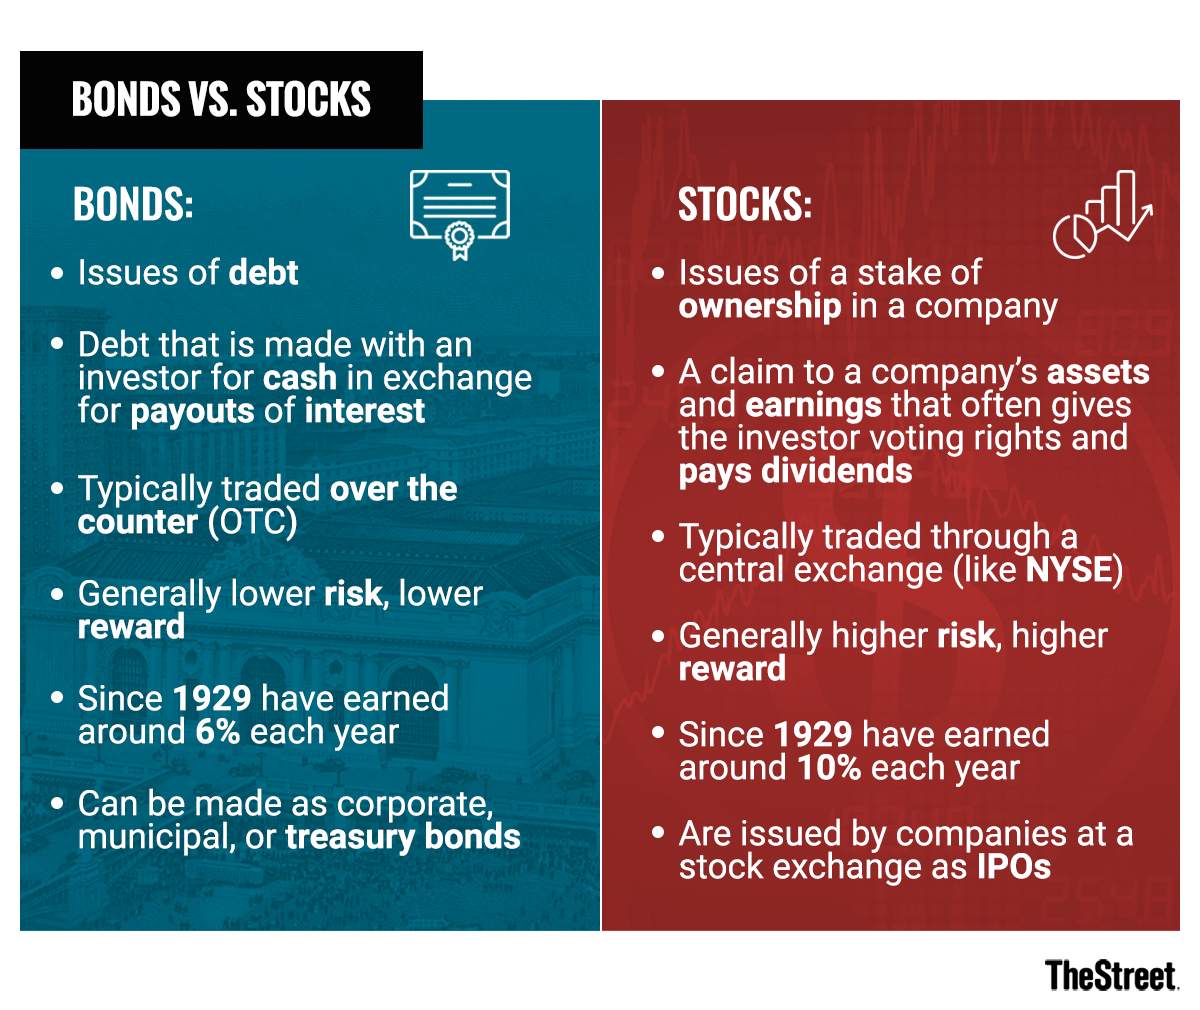 Investing in bonds tends to be riskier financial strategy than investing in common stocks bitcoin discussion groups